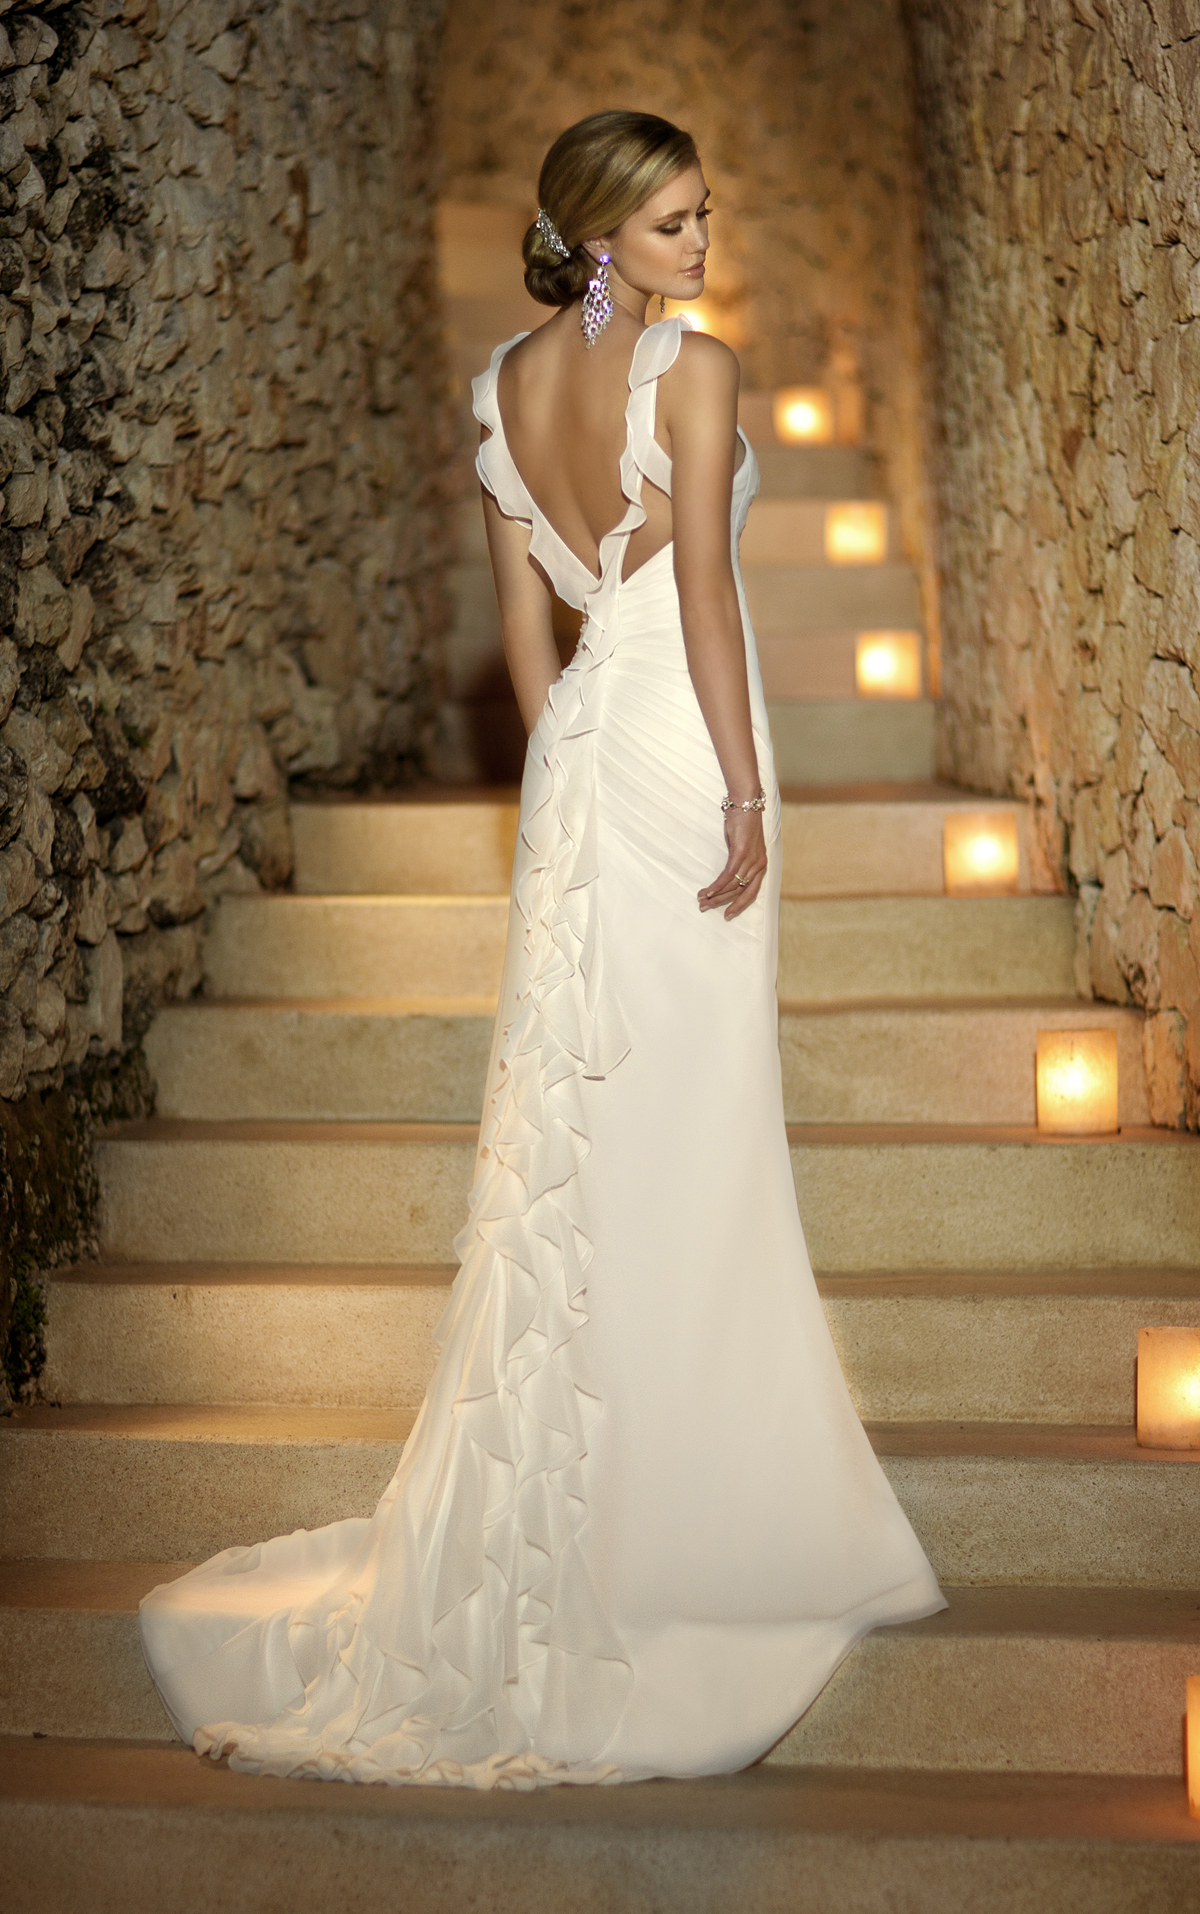 Amazing Wedding Dresses For A Beach Wedding in the year 2023 Learn more ...